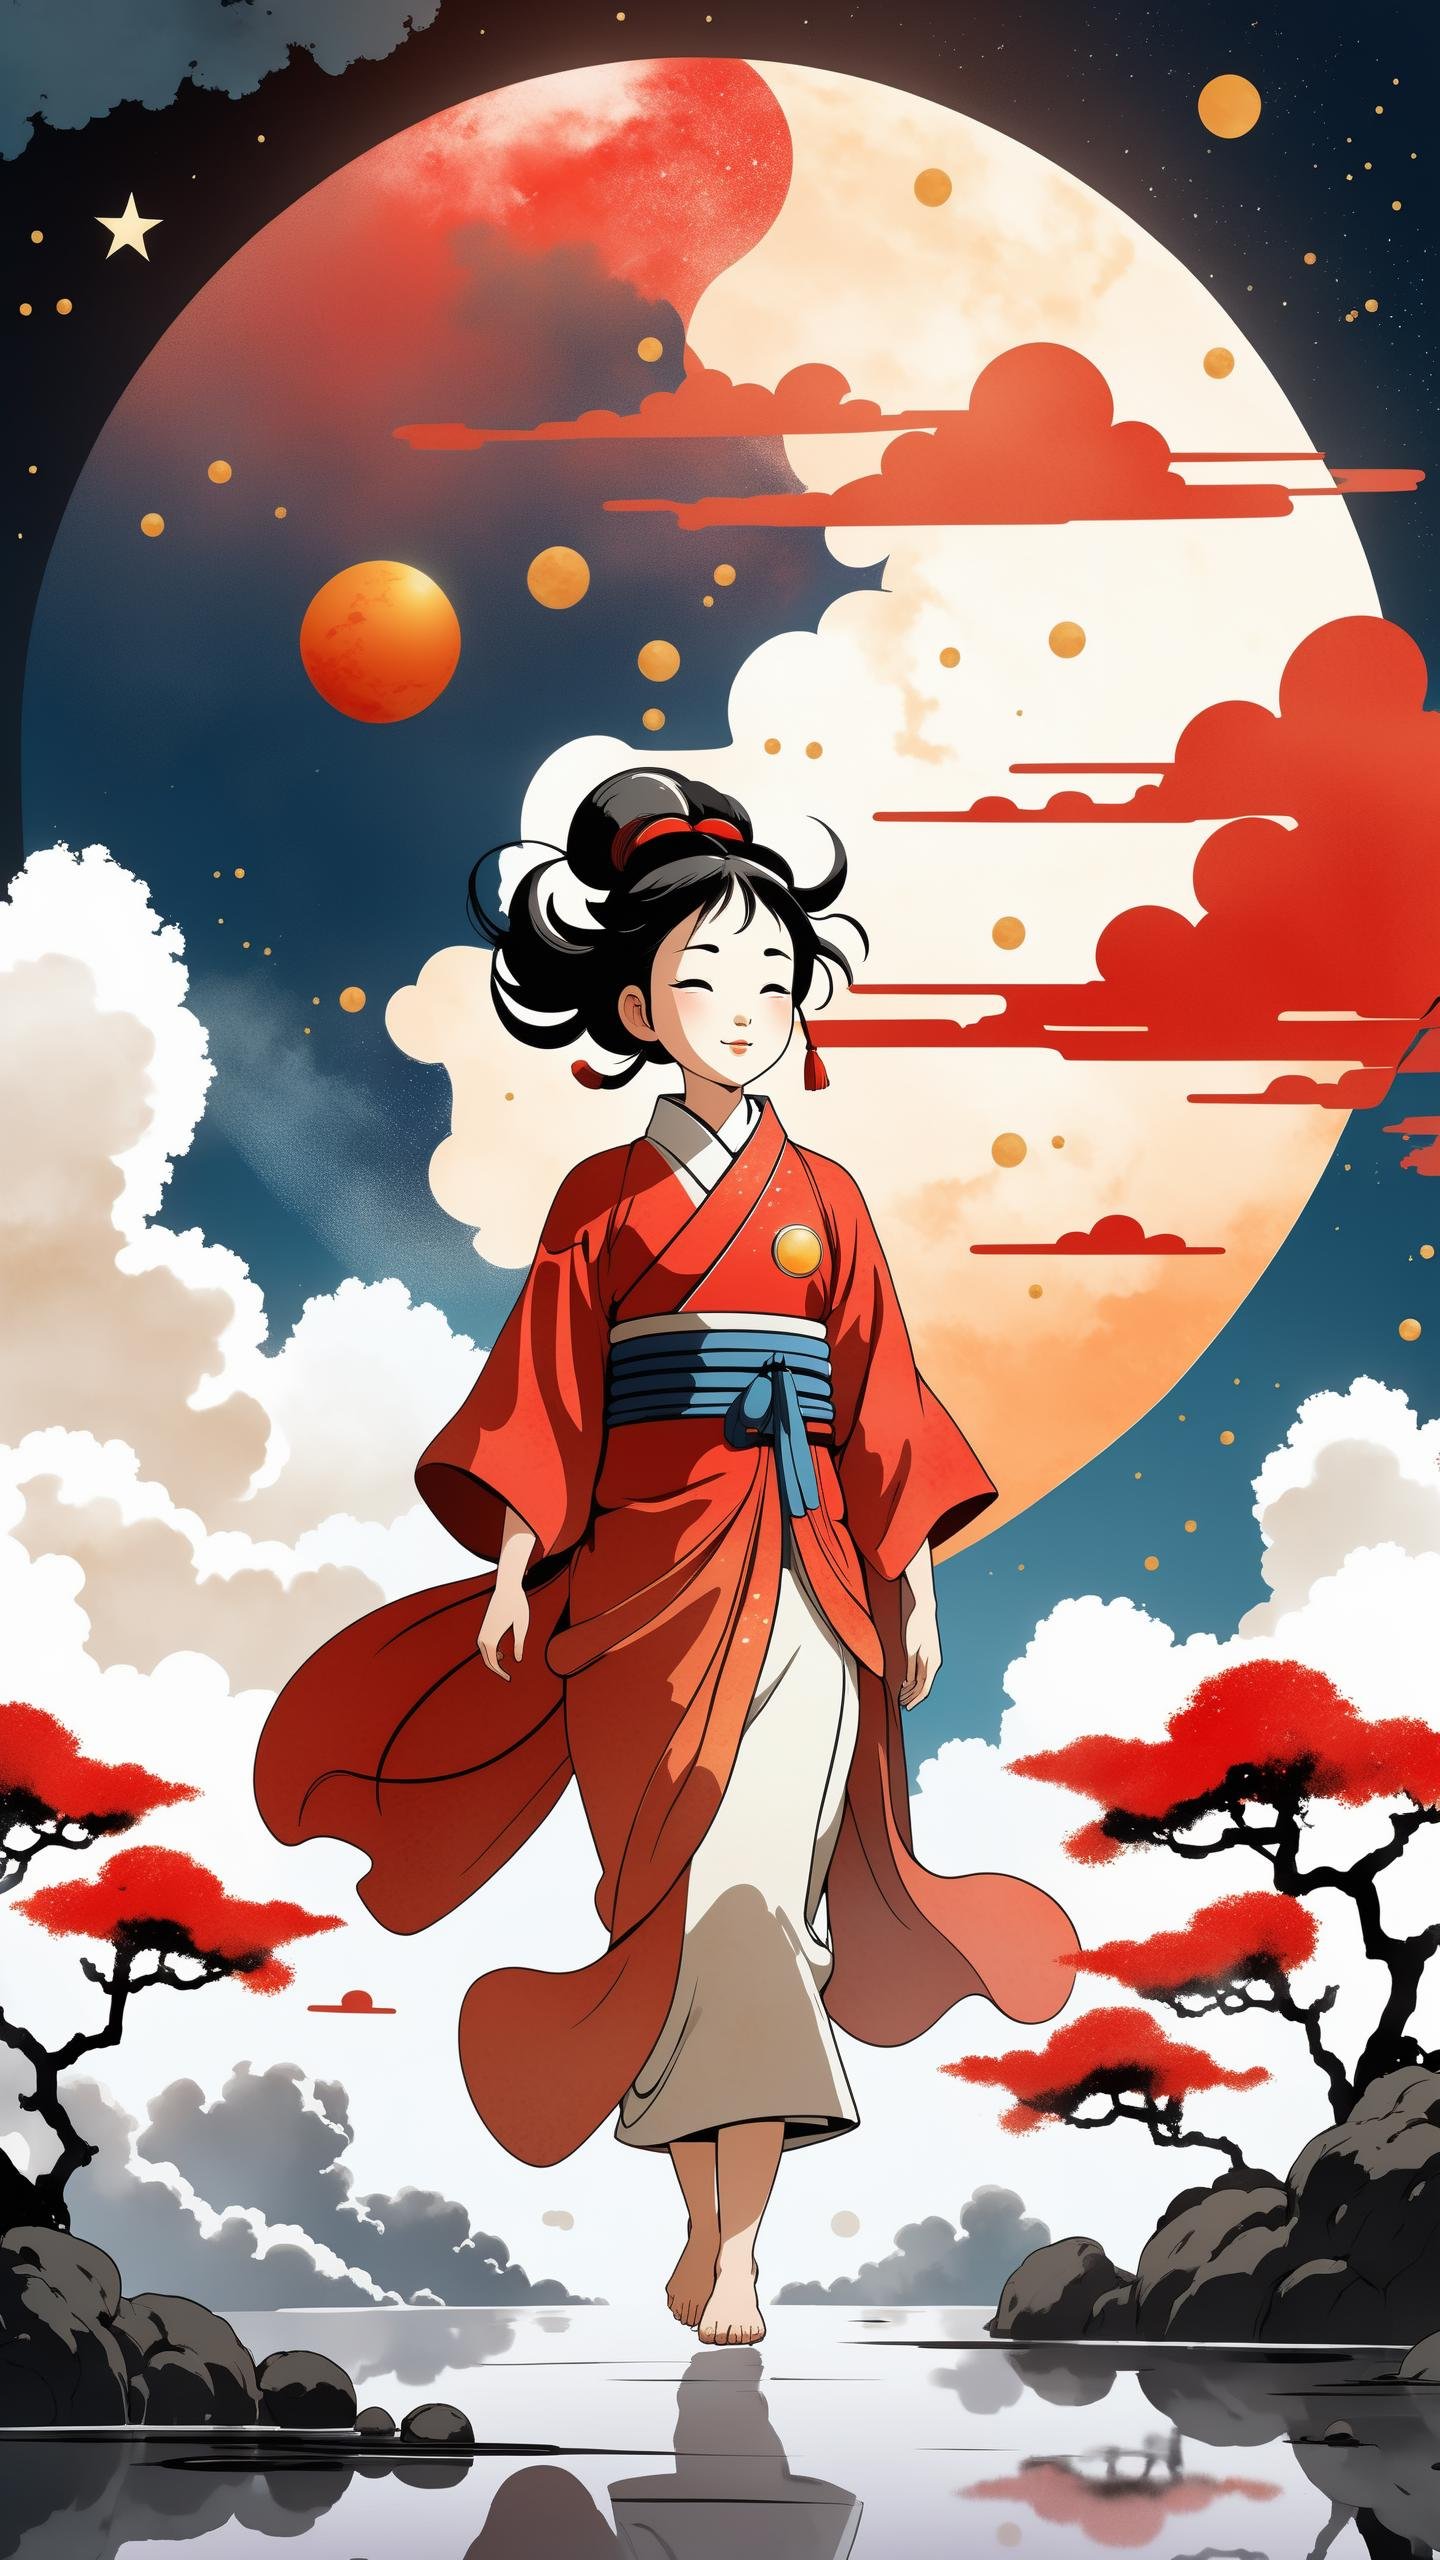 "A detailed illustration muted chinese ink painting, muted colors, rice paper texture, splash paint, halo ai, one human, one red sun. Venus. Space. Clouds wet to wet techniques. vibrant vector. using Cinema 4D, cute ghibli studio style, cute cartoon style